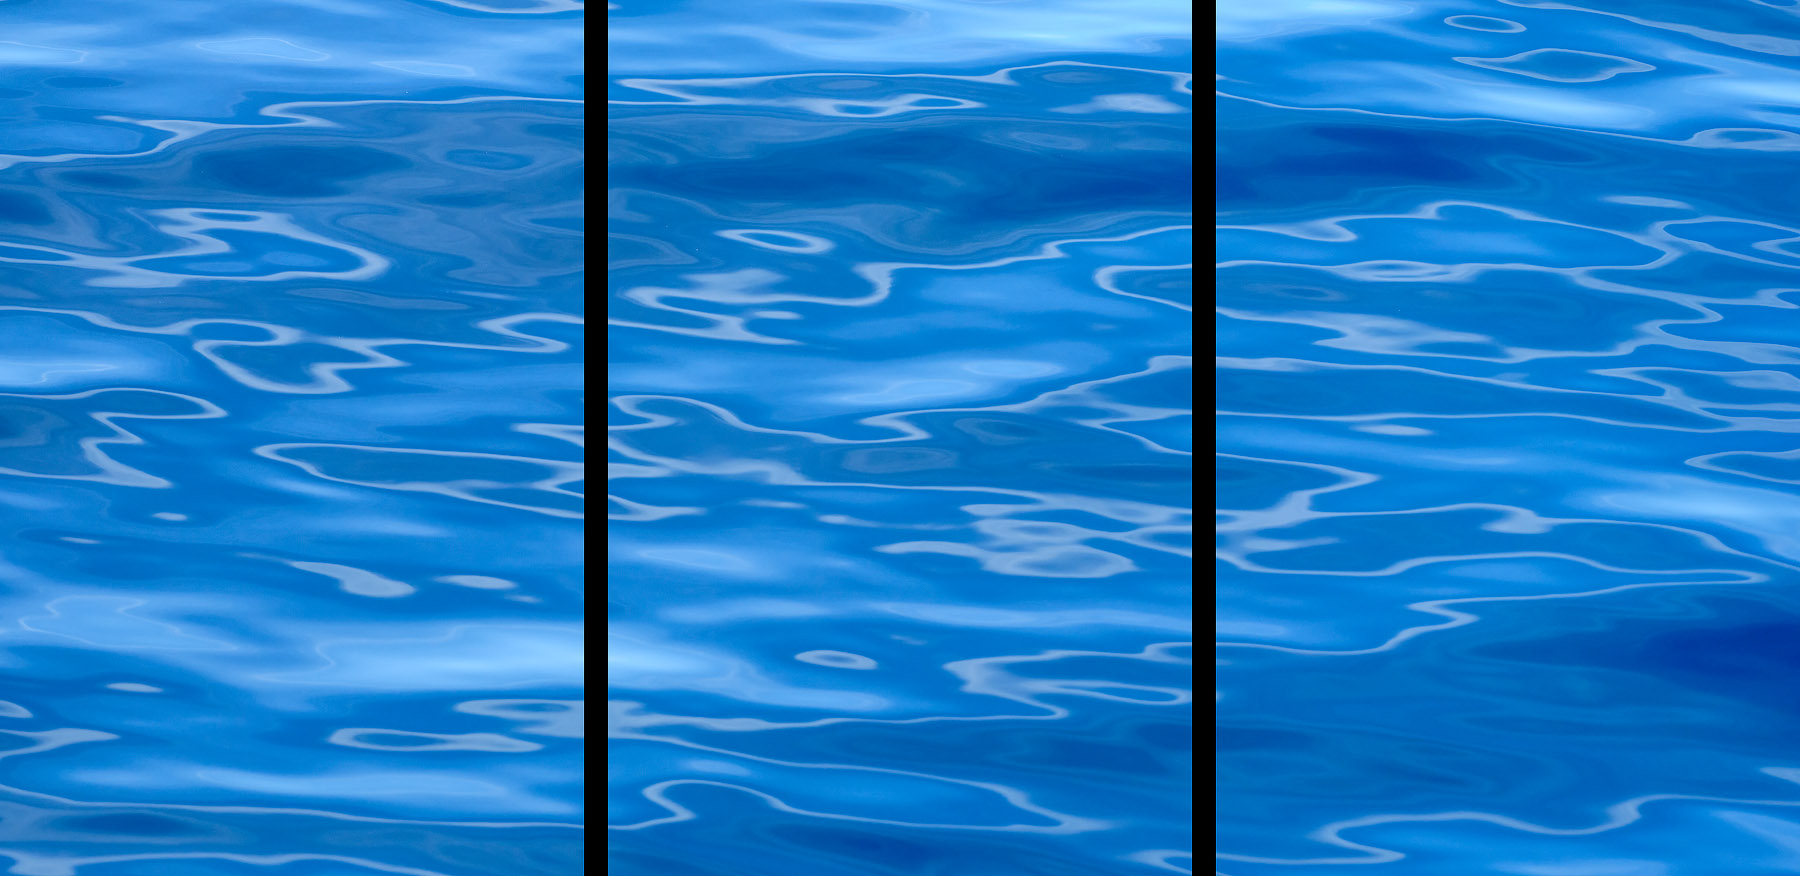 an abstract water image featuring surface reflections of the ocean in Maui, Hawaii.  Maui Landscape Photography by Hawaii artist Andrew Shoemaker